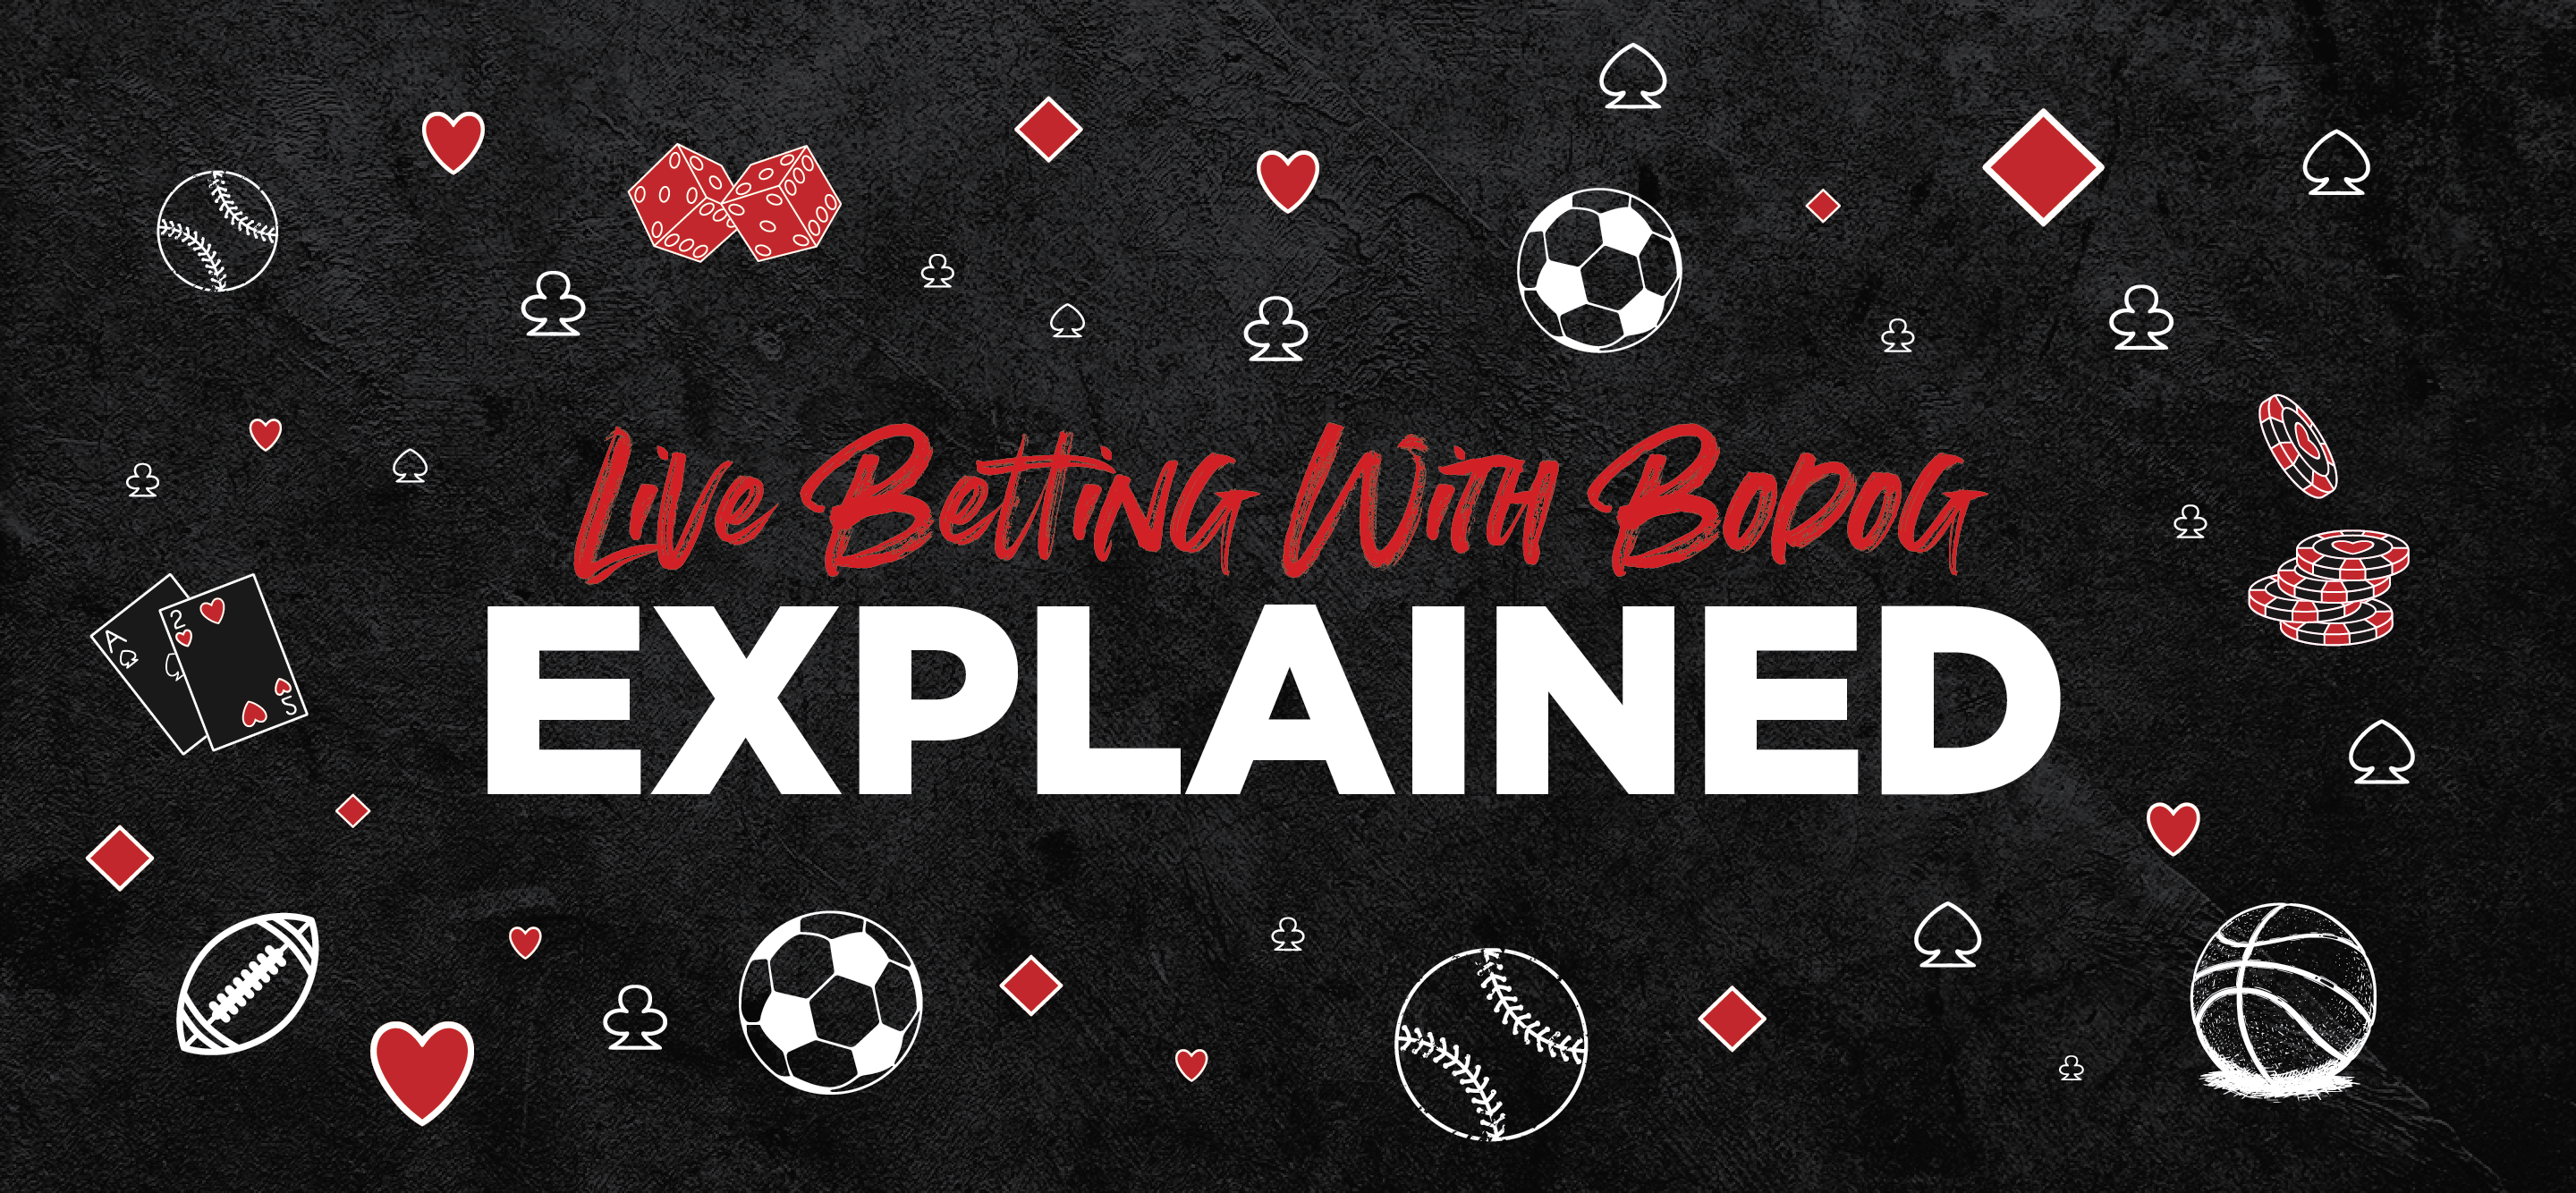 Live betting with Bodog explained.